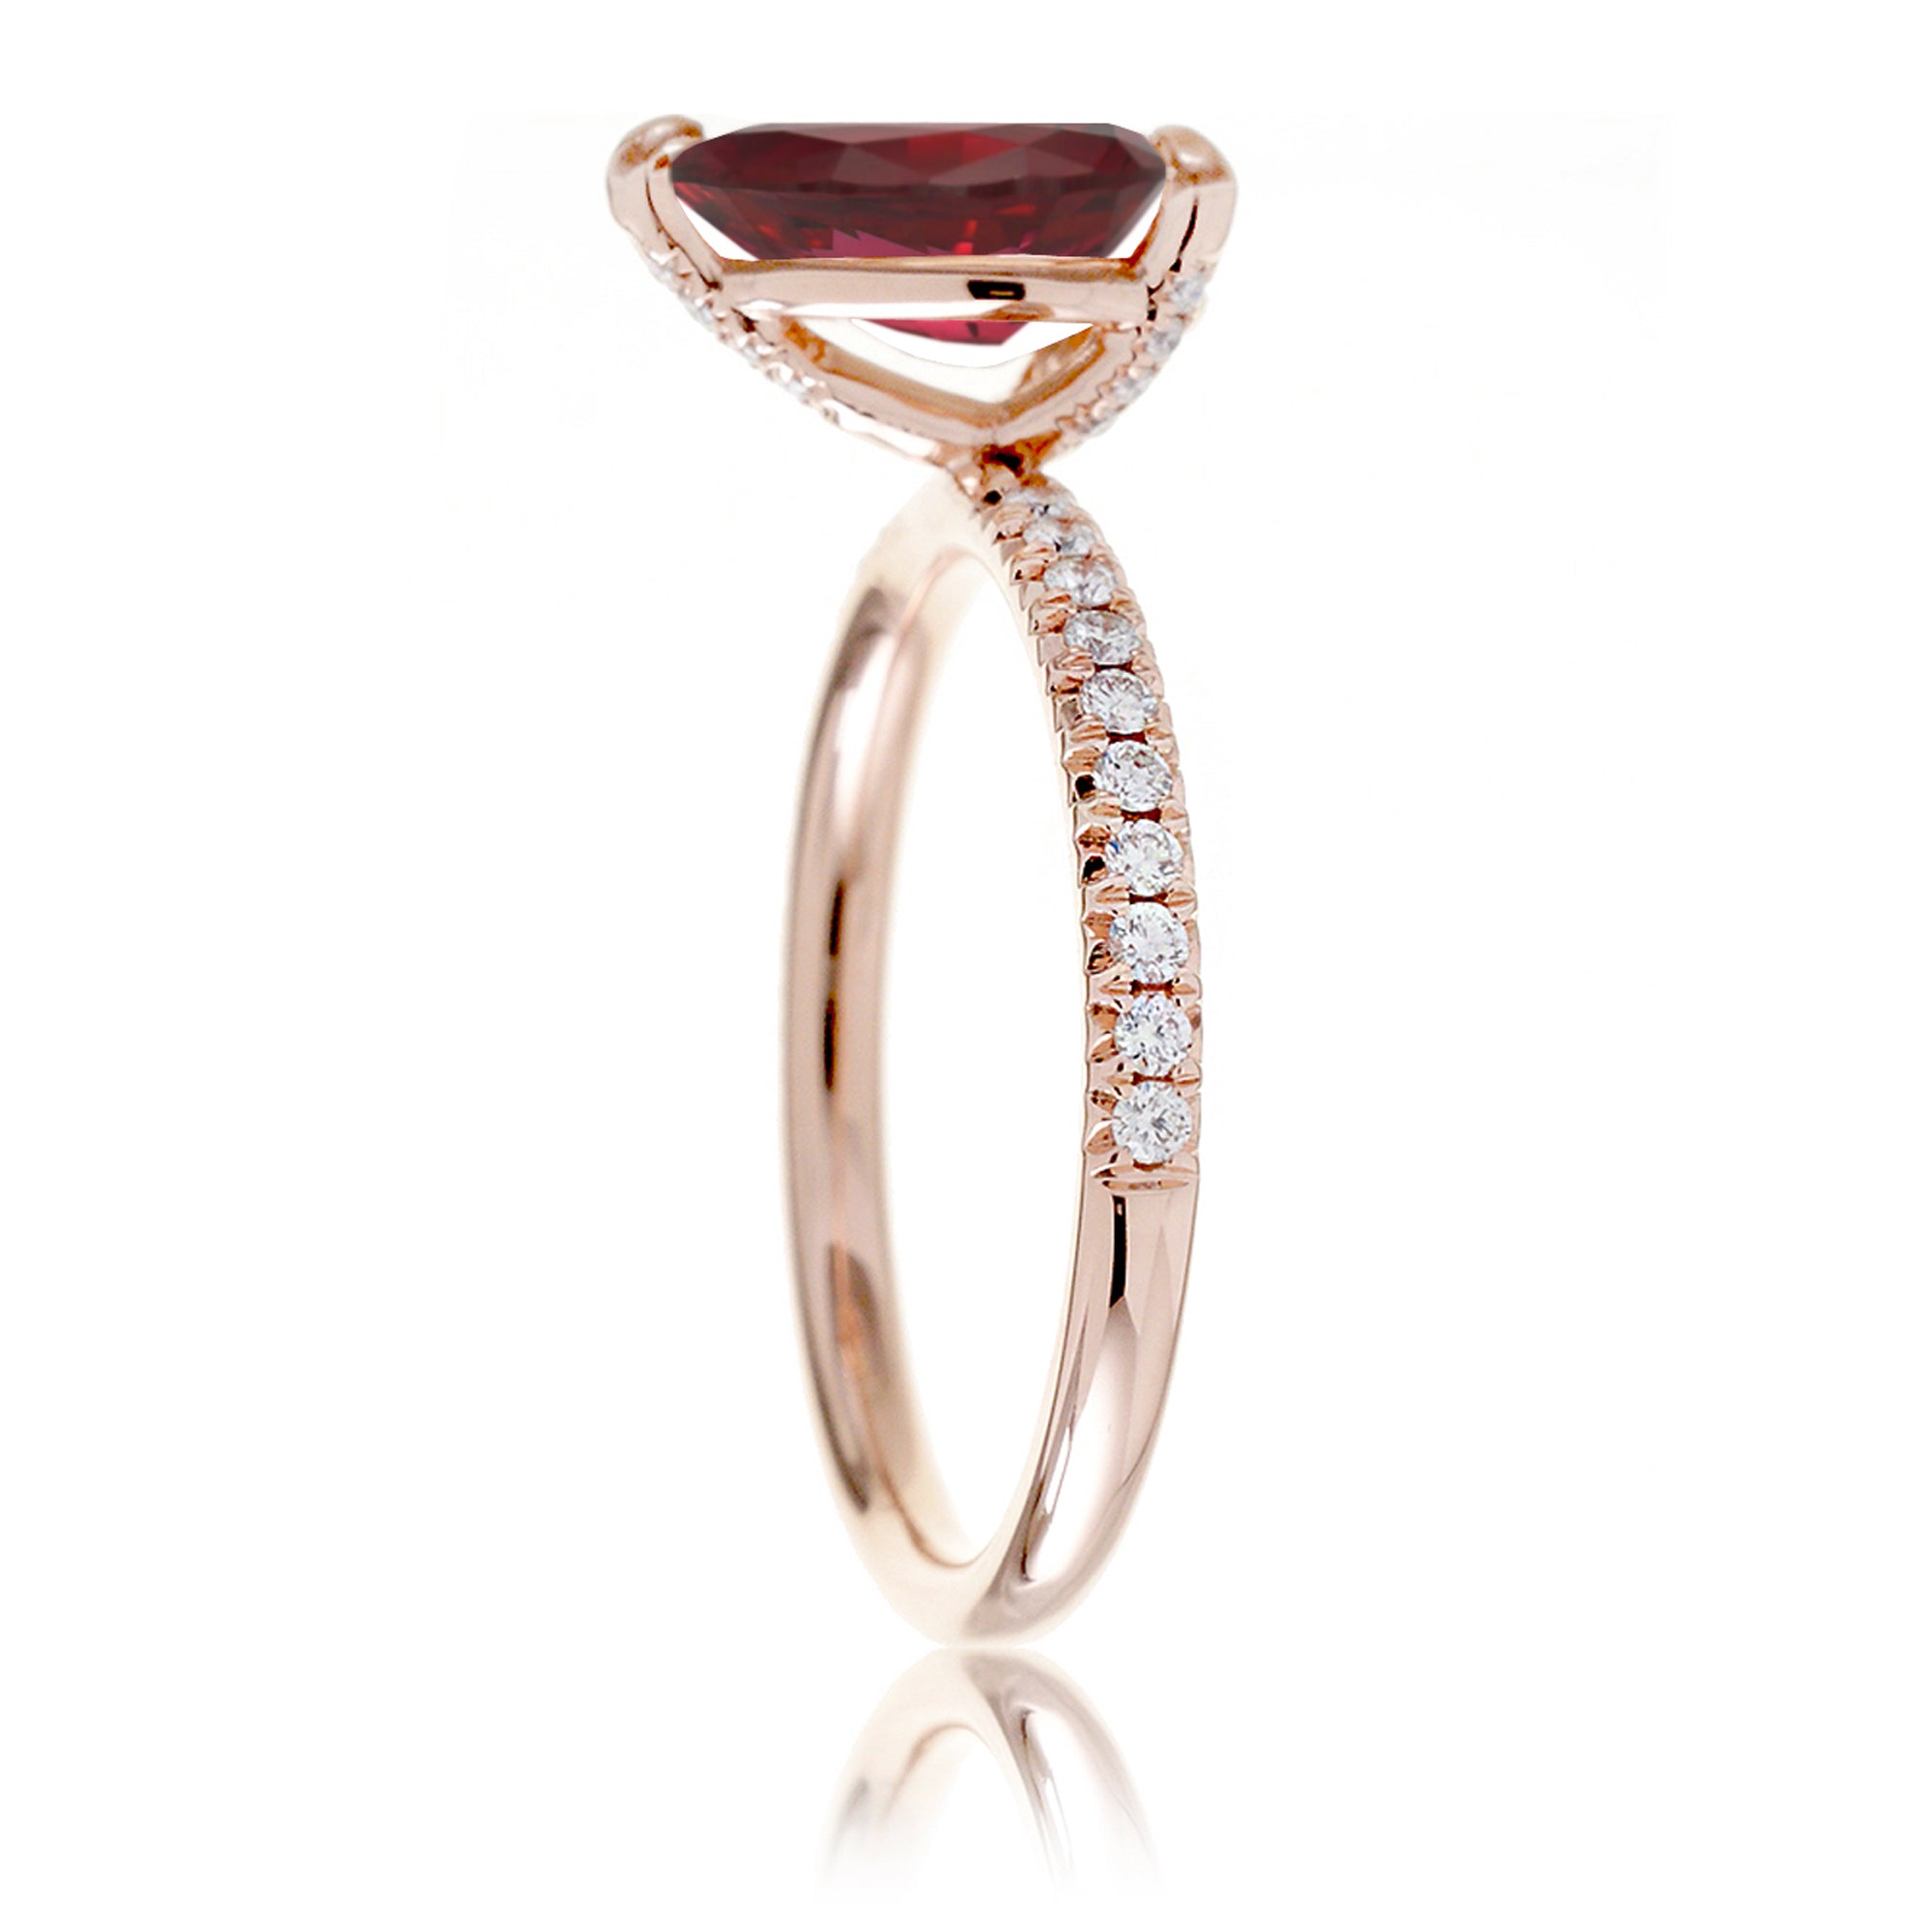 Pear cut lab-grown ruby engagement ring diamond band rose gold - the Ava